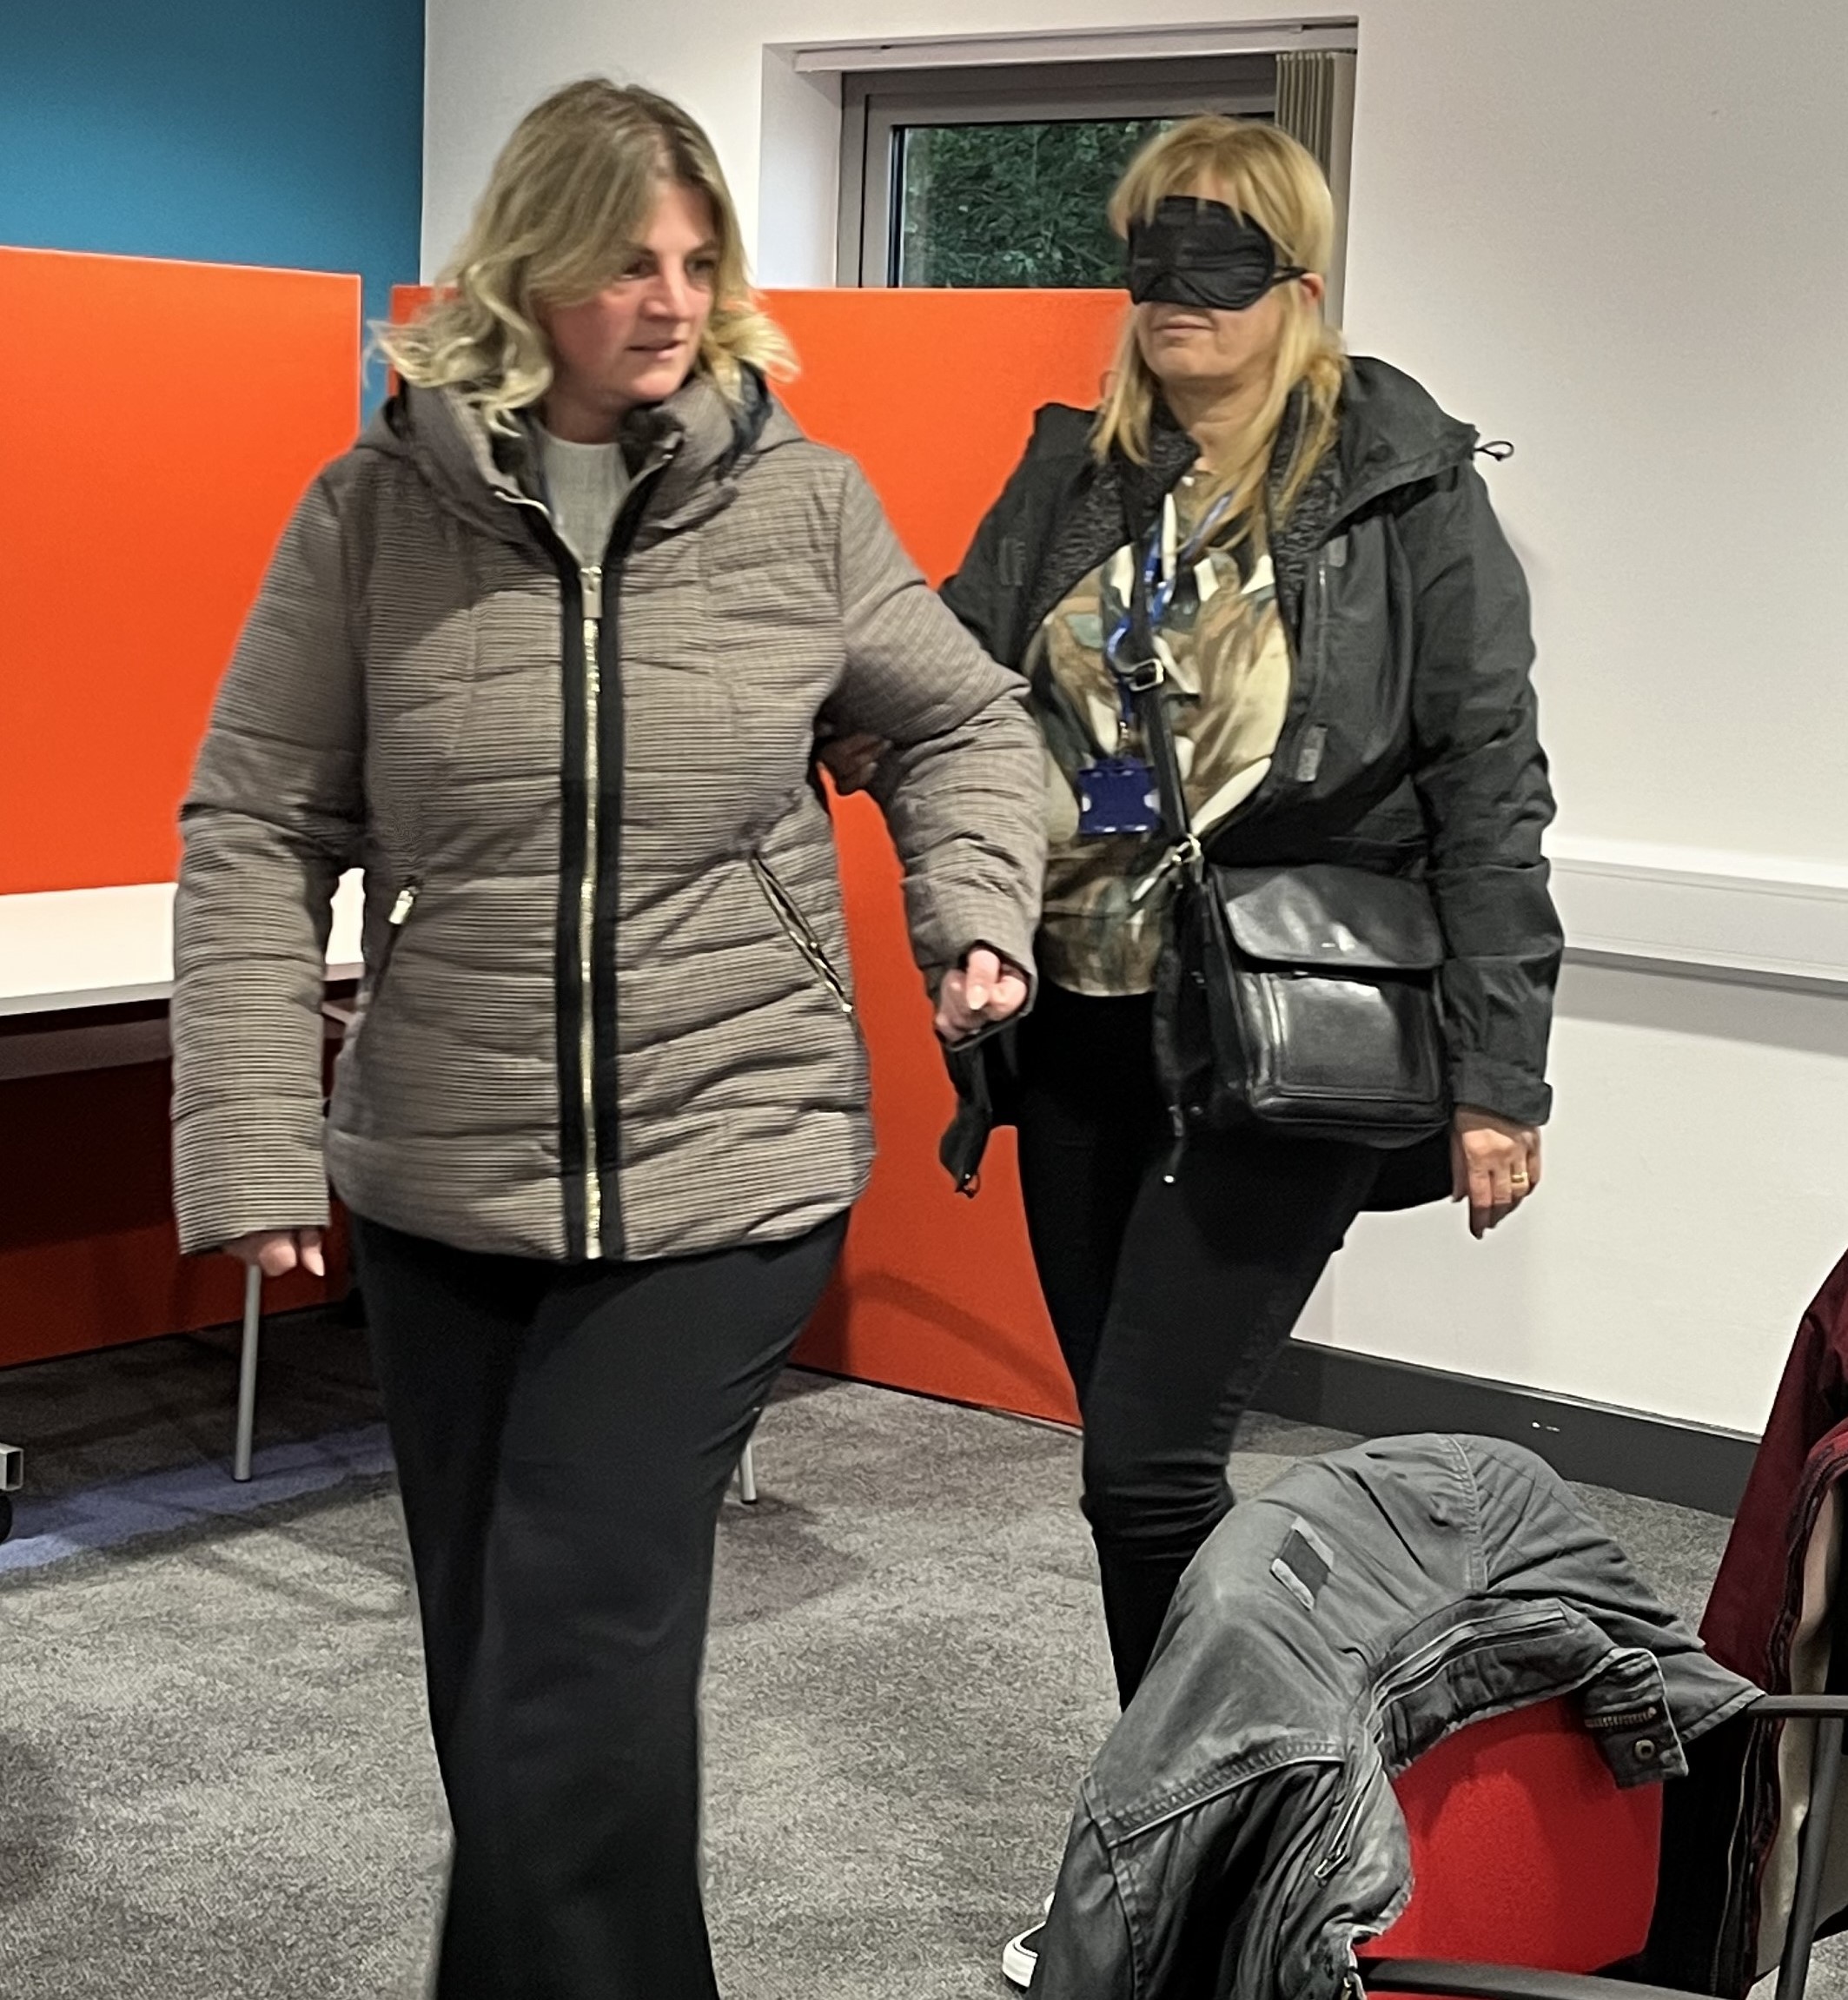 Photograph shows one woman wearing a blindfold, holding the hand of another woman who is guiding her